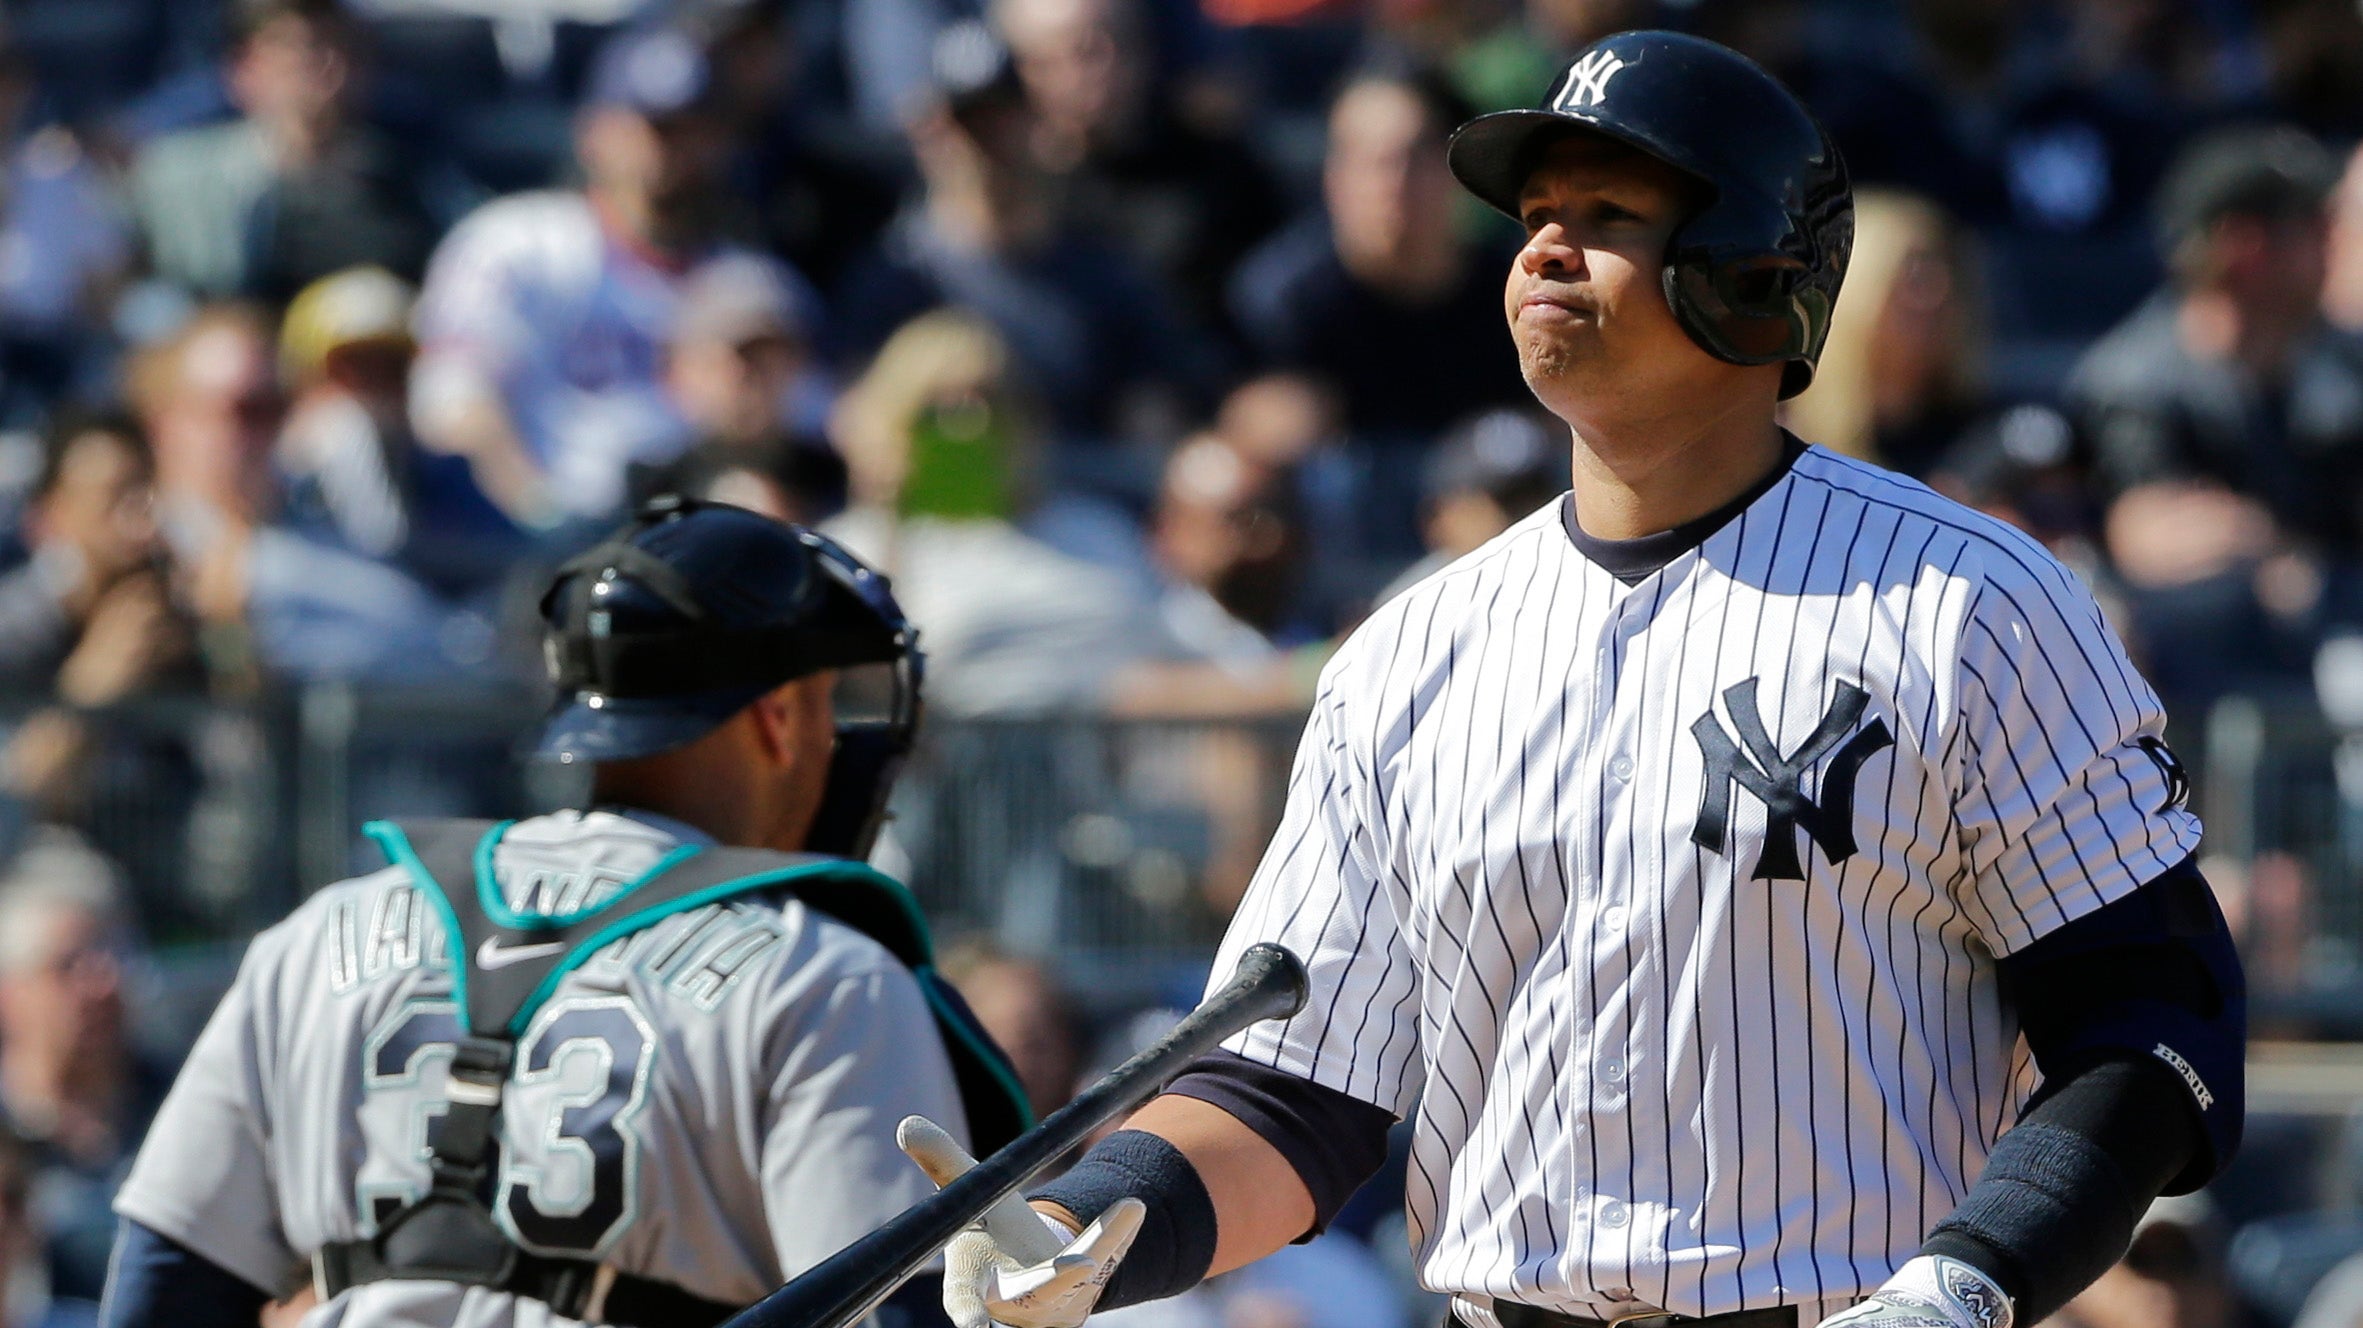 Adios A-Rod: Yankees announce slugger will play last game with team Aug. 12